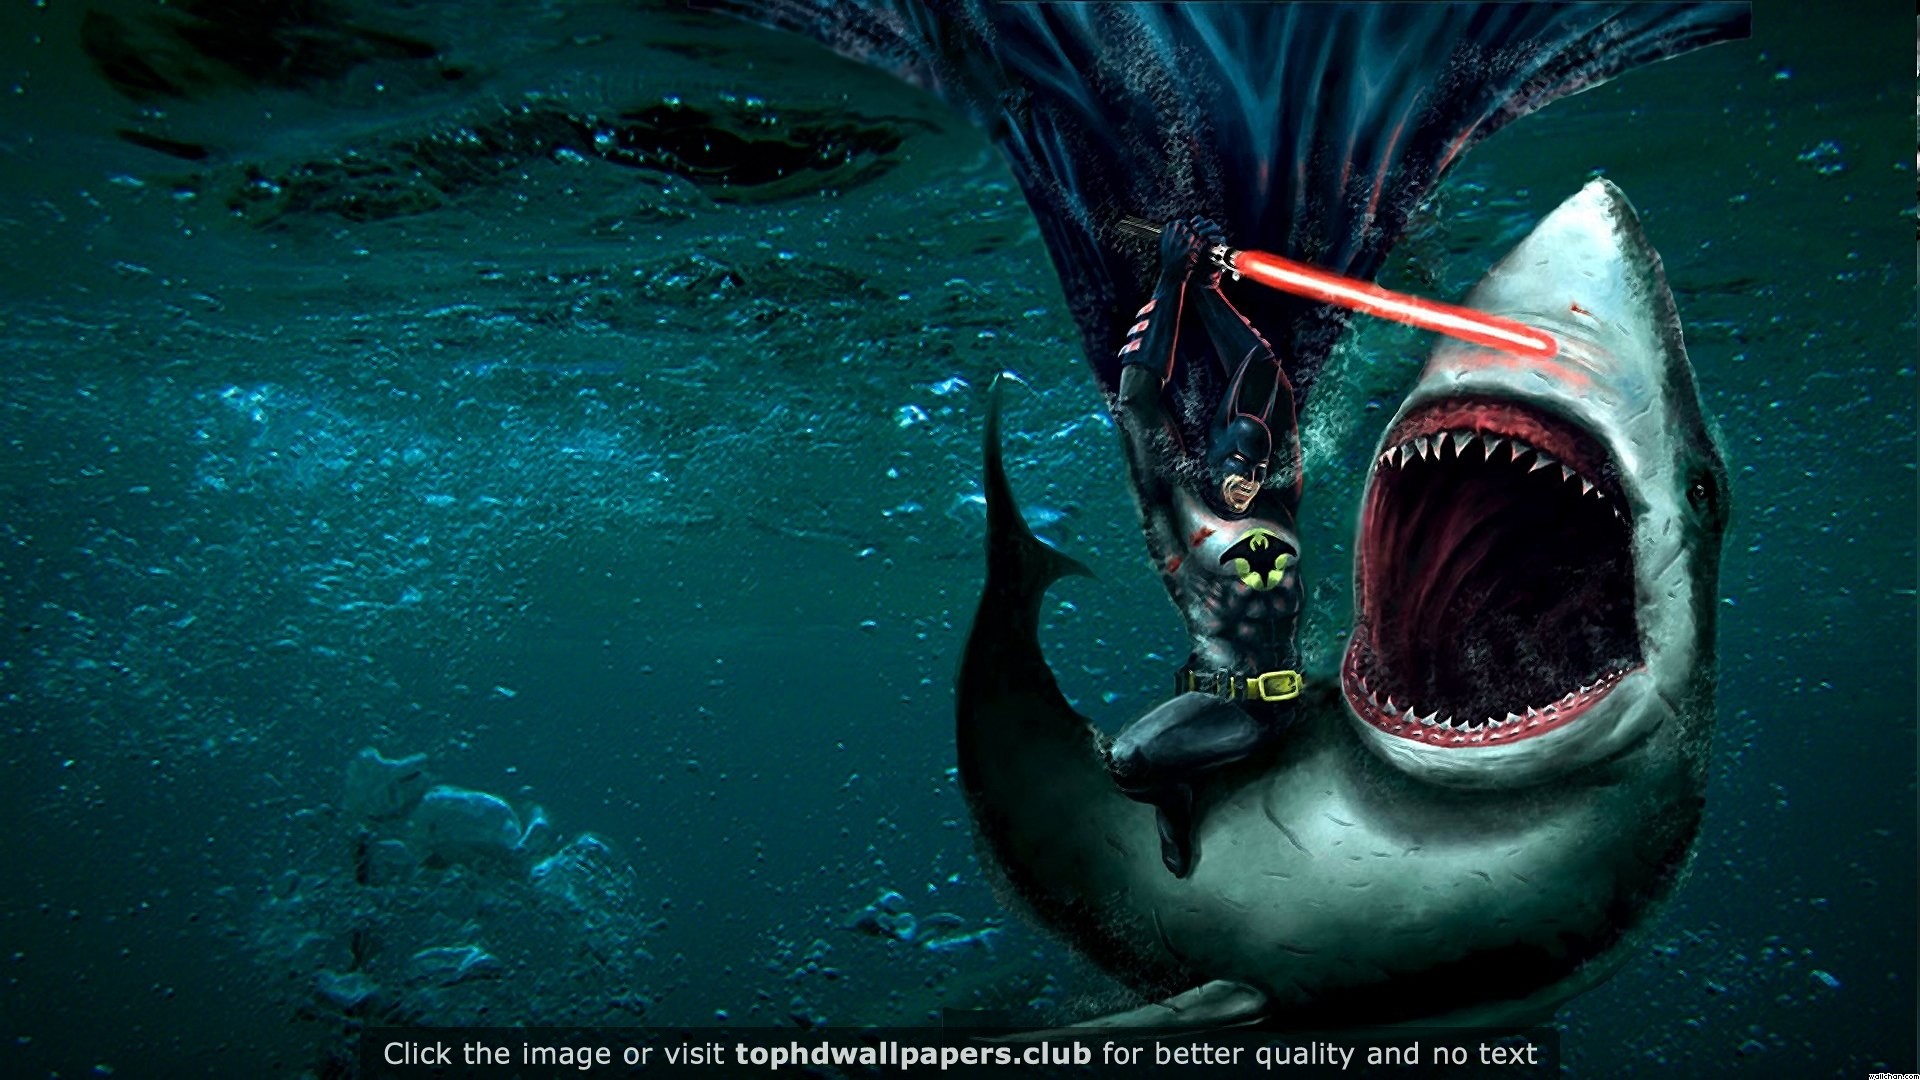 Batman Fighting a Shark With a Lightsaber 4K or HD wallpaper for your PC, Mac